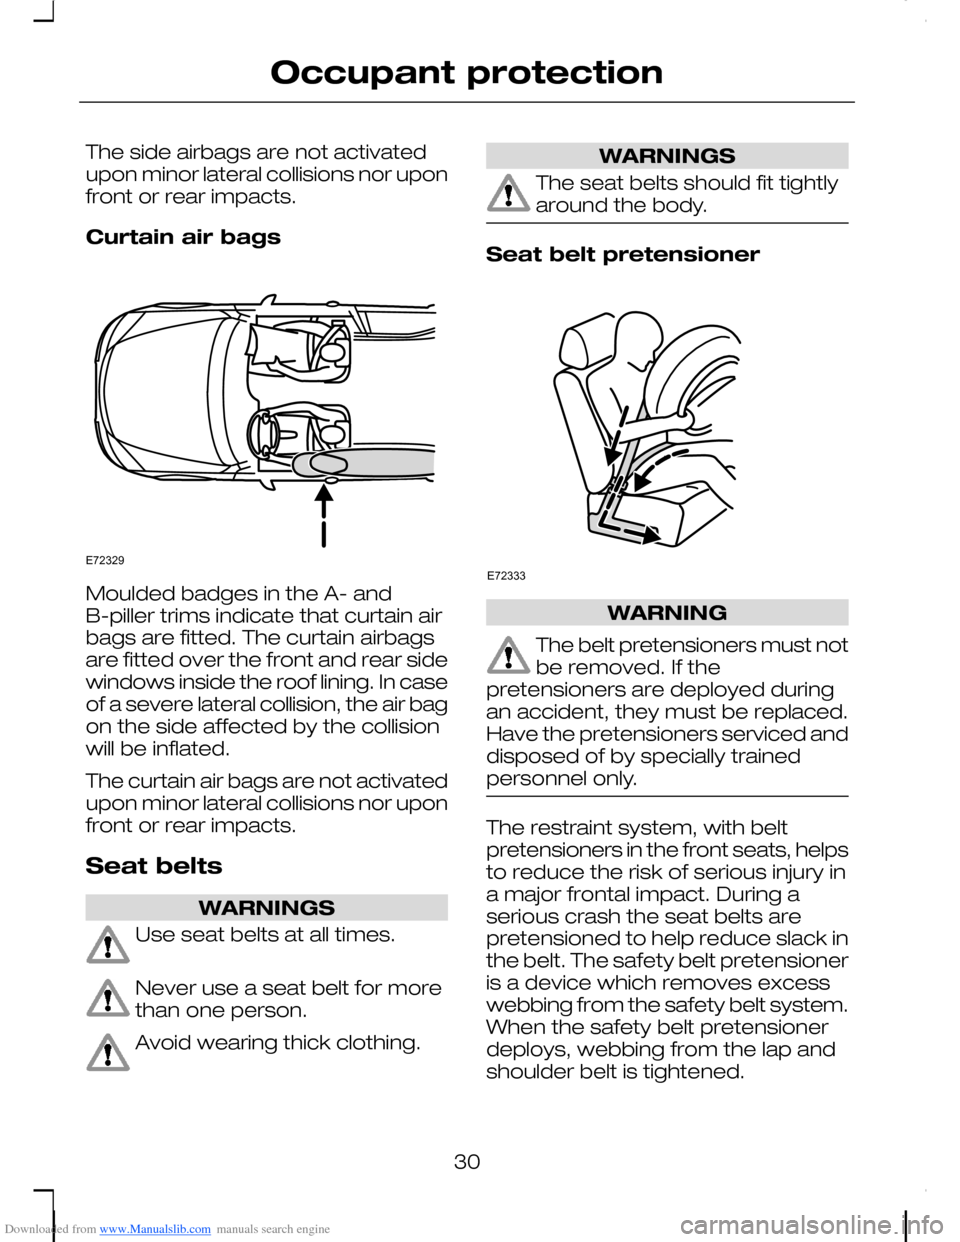 FORD C MAX 2008 1.G Owners Guide Downloaded from www.Manualslib.com manuals search engine The side airbags are not activatedupon minor lateral collisions nor uponfront or rear impacts.
Curtain air bags
Moulded badges in the A- andB-p